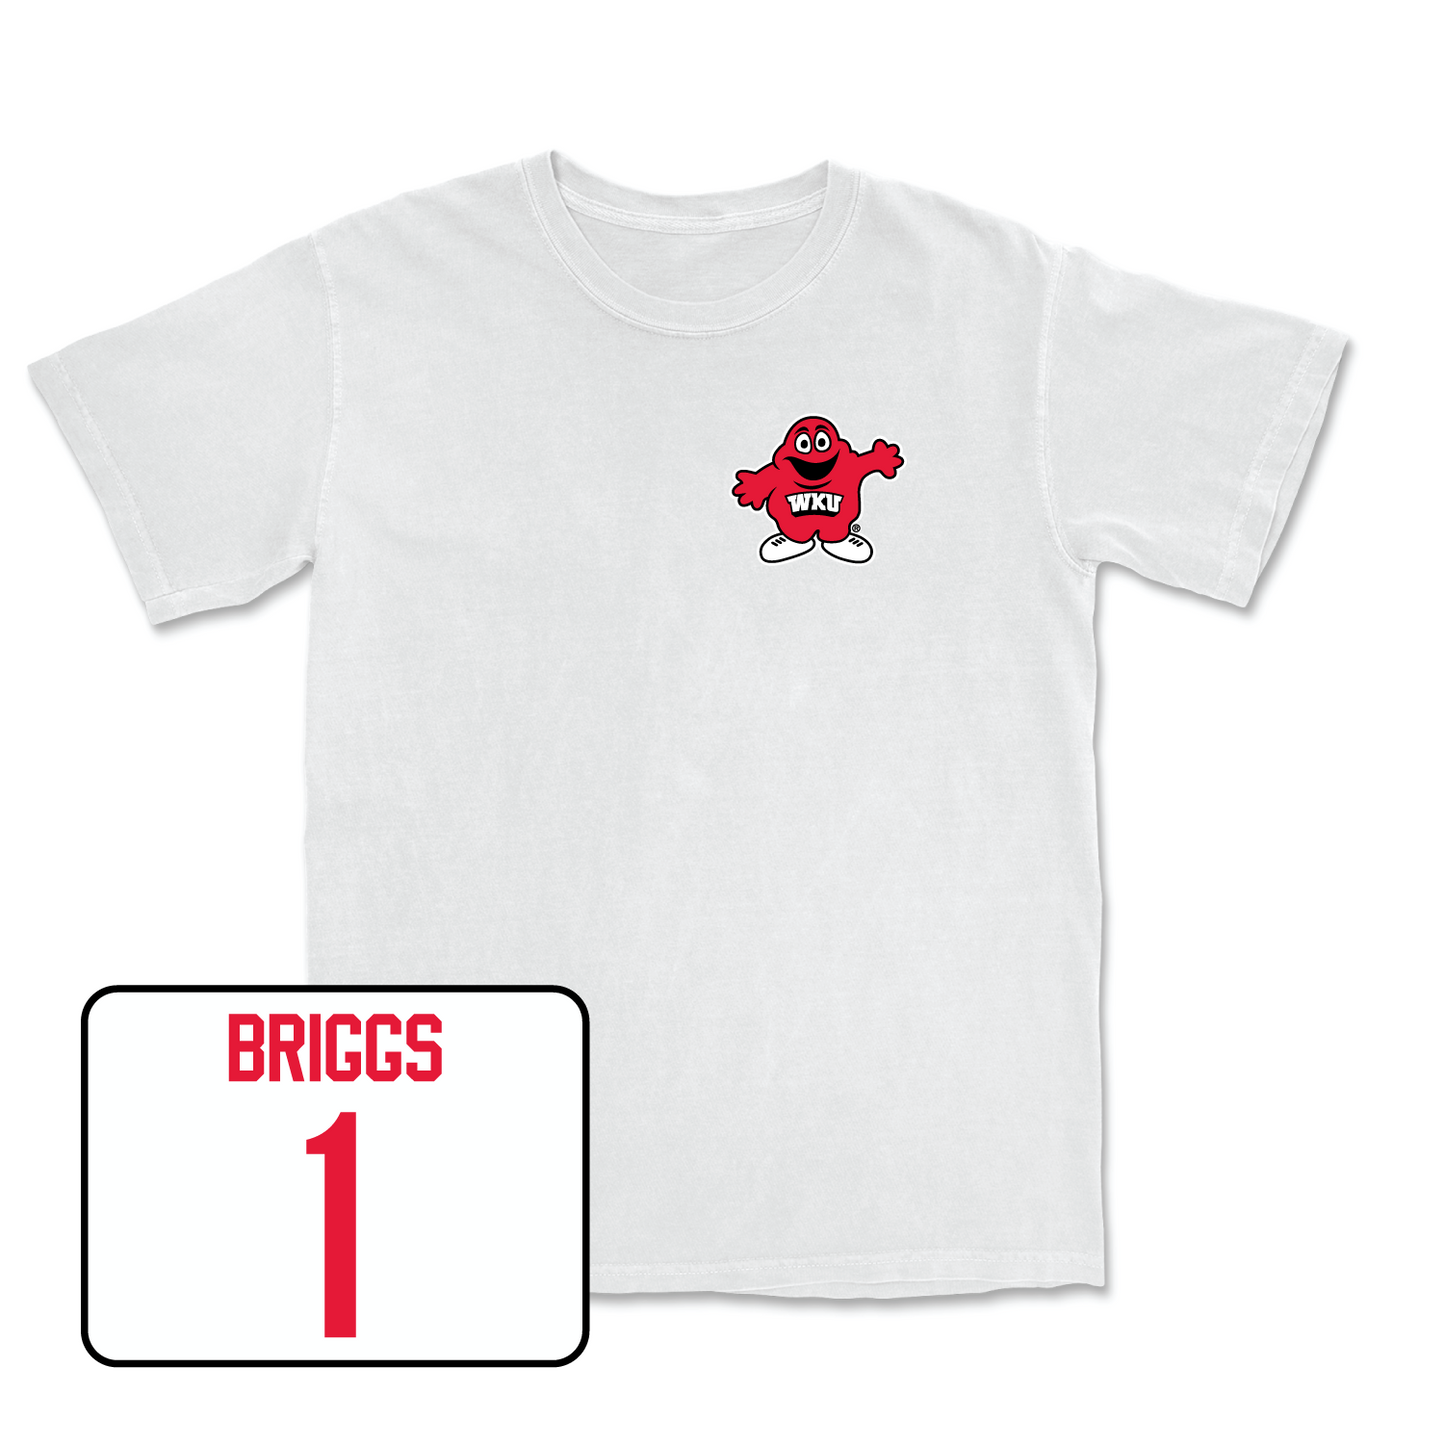 White Women's Volleyball Big Red Comfort Colors Tee X-Large / Paige Briggs | #1